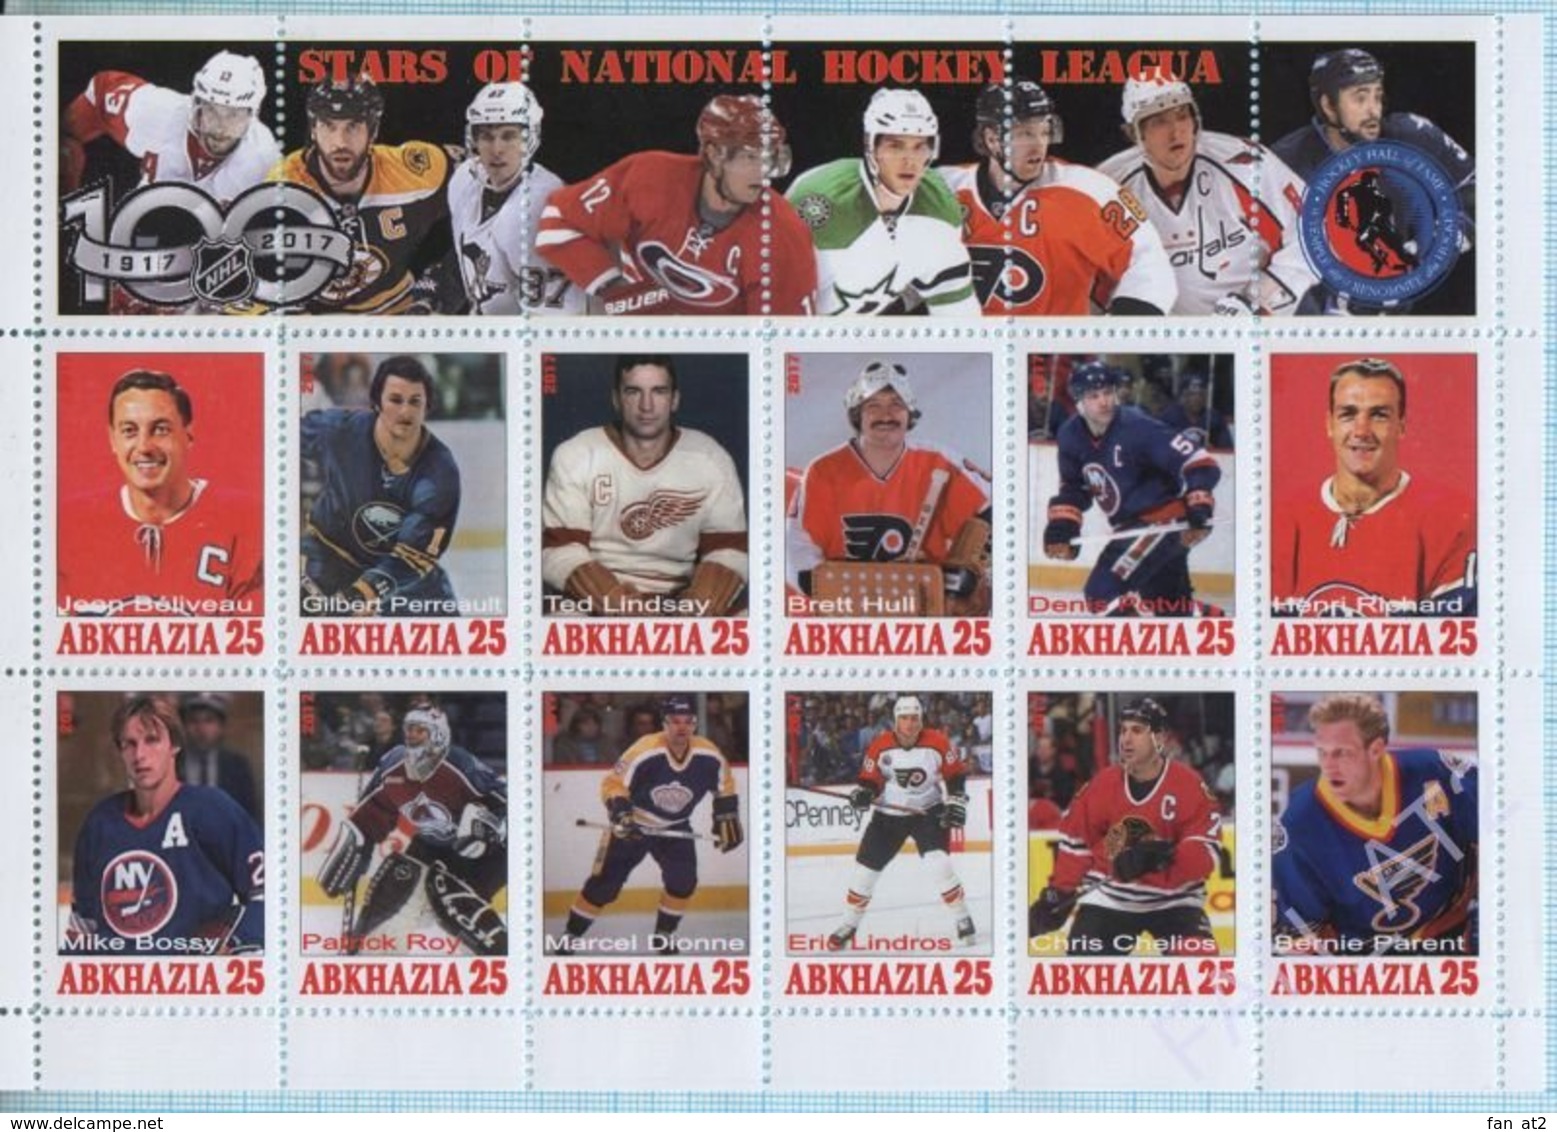 Abkhazia / Stamps / Private Issue. Sport. Hockey. NHL 100 Years. STARS OF NATIONAL HOCKEY LEAGUA. 2017. - Vignettes De Fantaisie